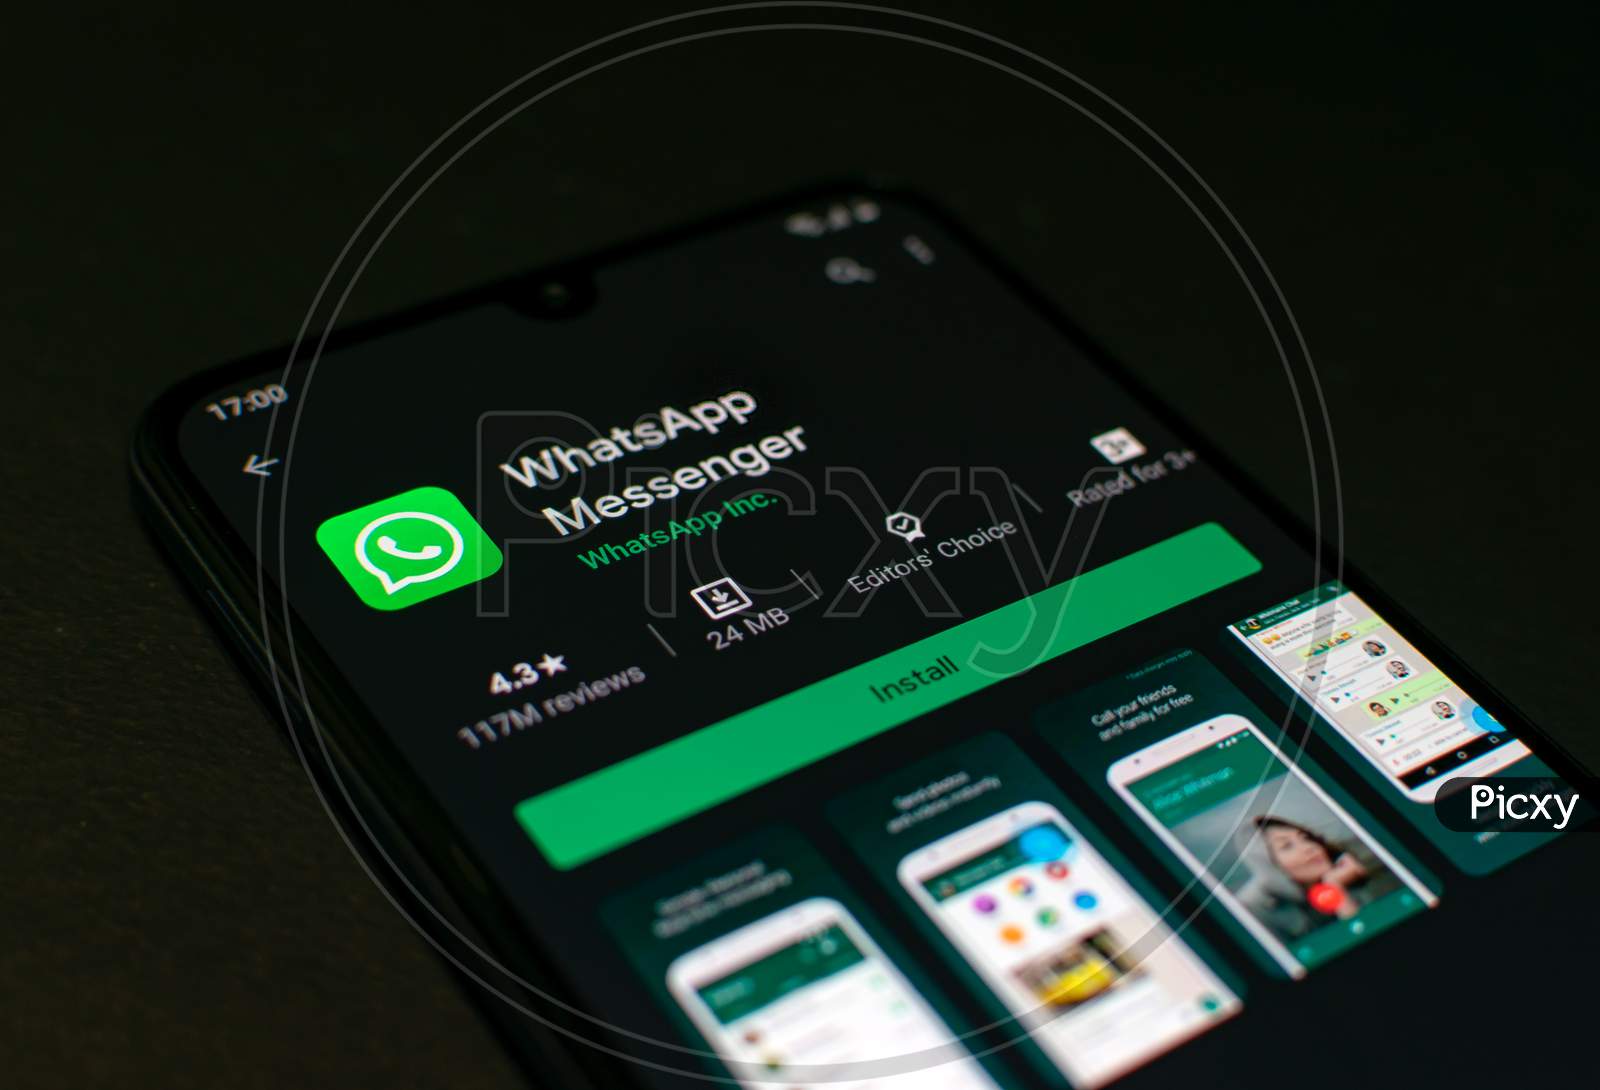 Whatsapp Messenger application on Smartphone screen. This Chating app is a freeware in Android Playstore developed by Whatsapp Inc